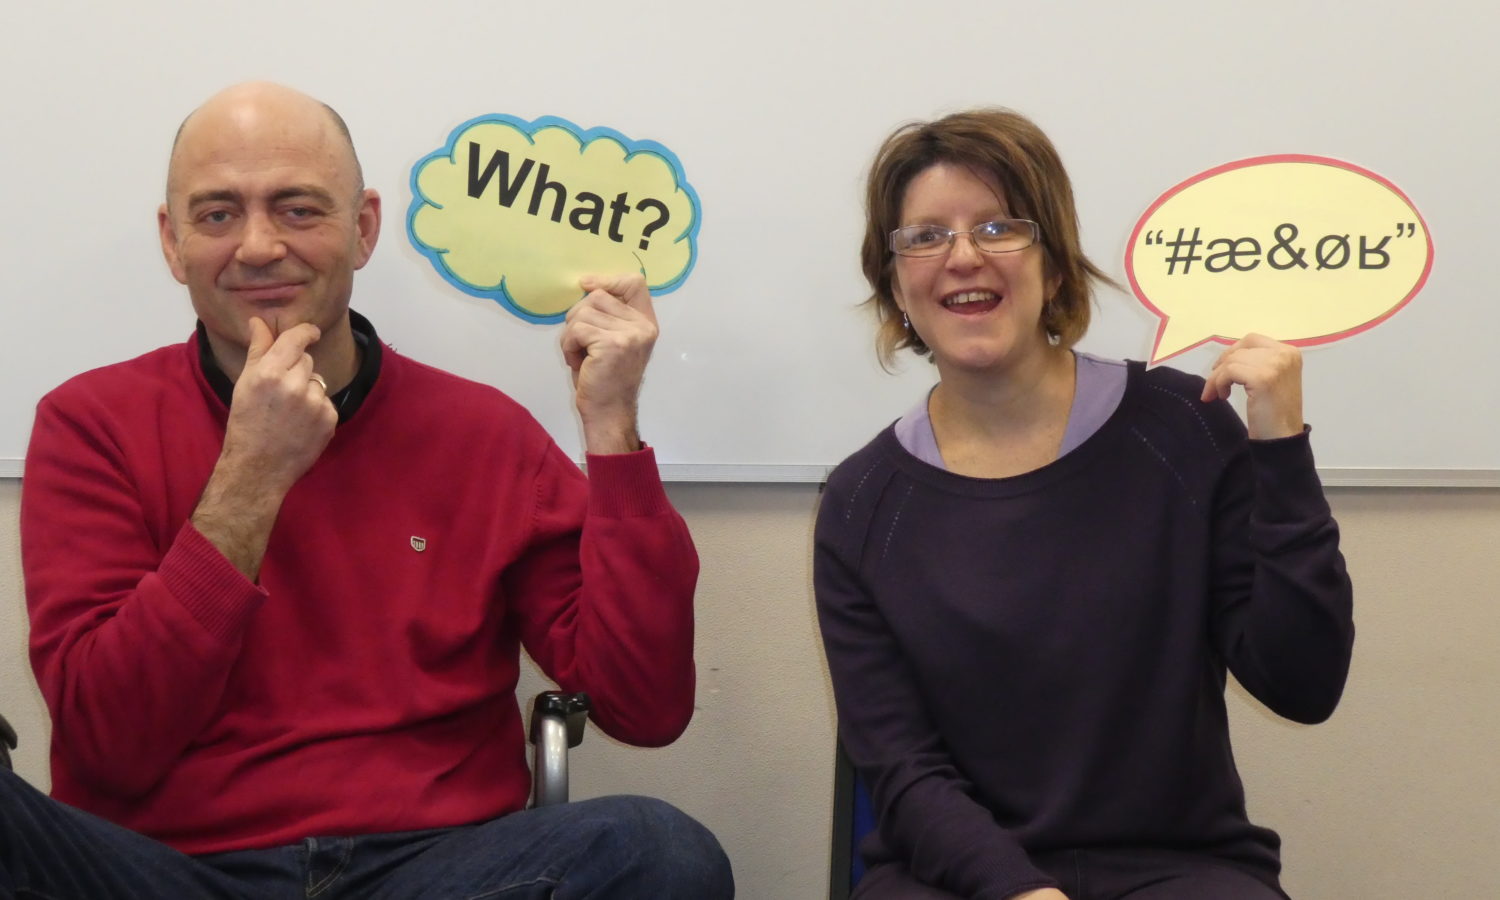 Two people one hold up a speech bubble that says 'What?' and another holding a speech bubble with confused graphics